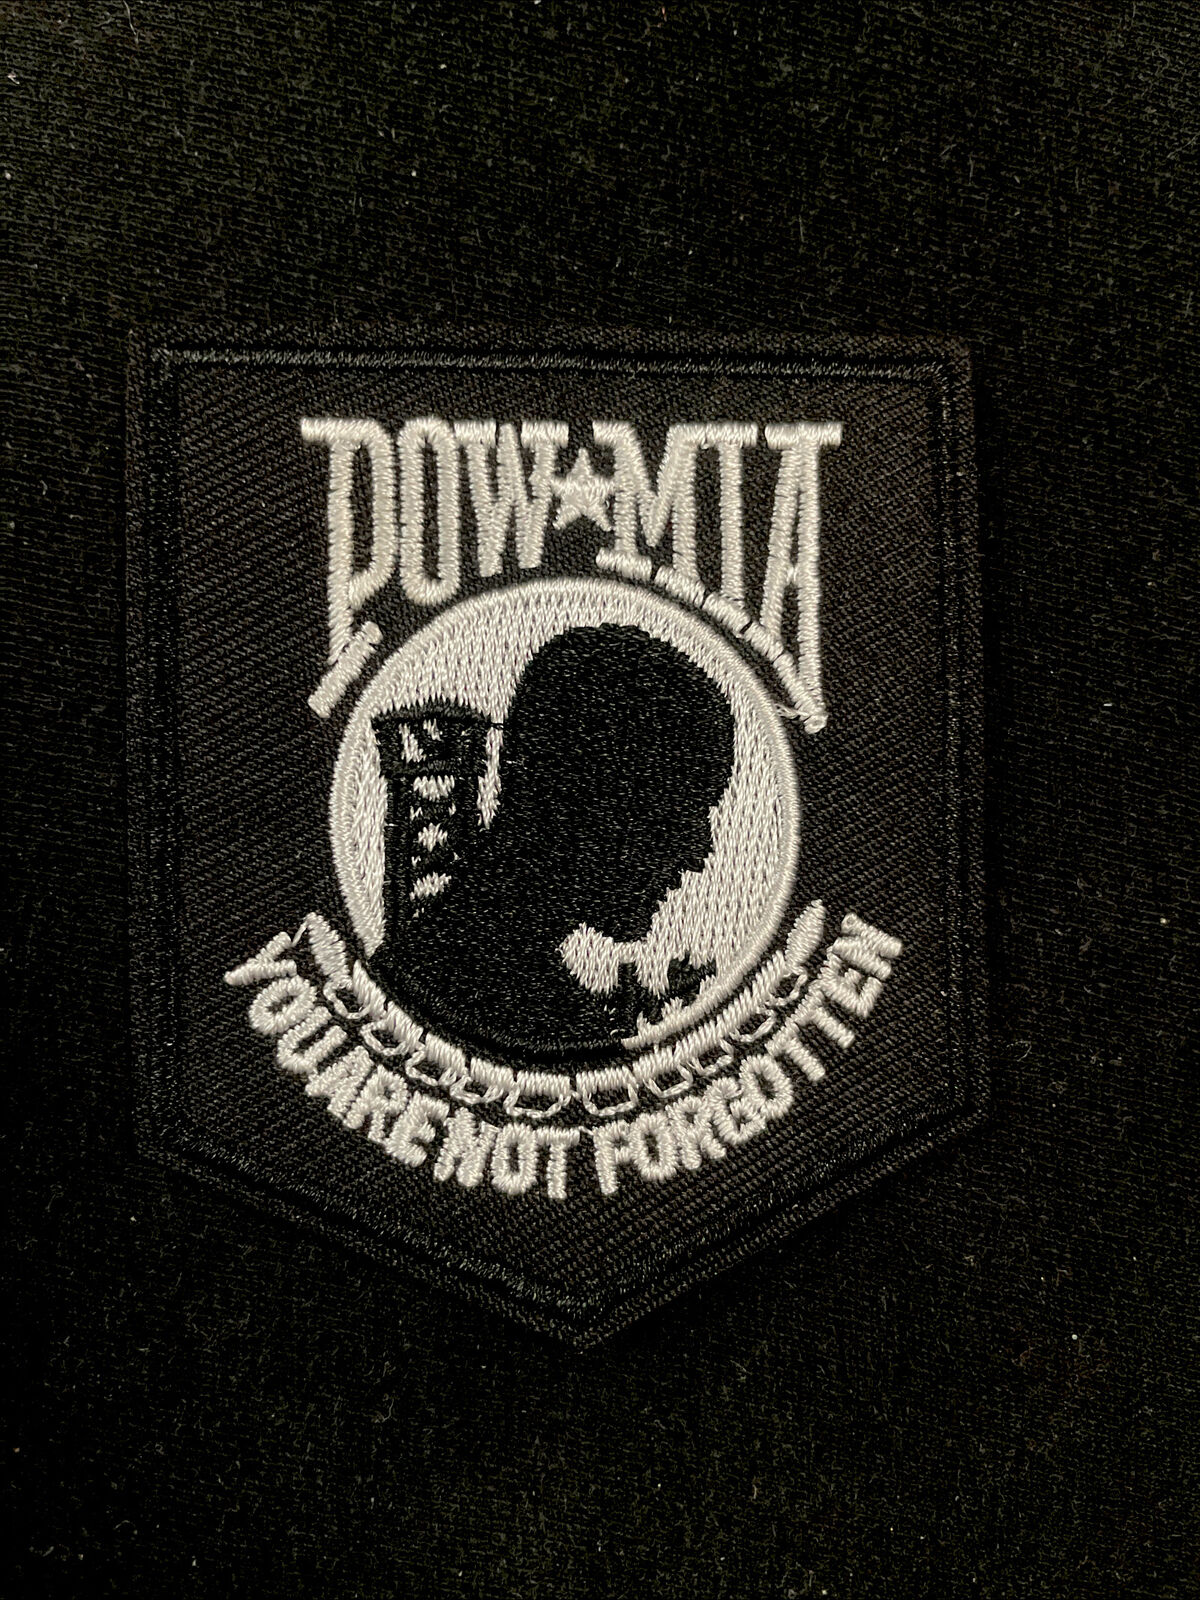 POW-MIA PATCH VIETNAM WAR embroidered iron-on military veteran emblem REMEMBERED